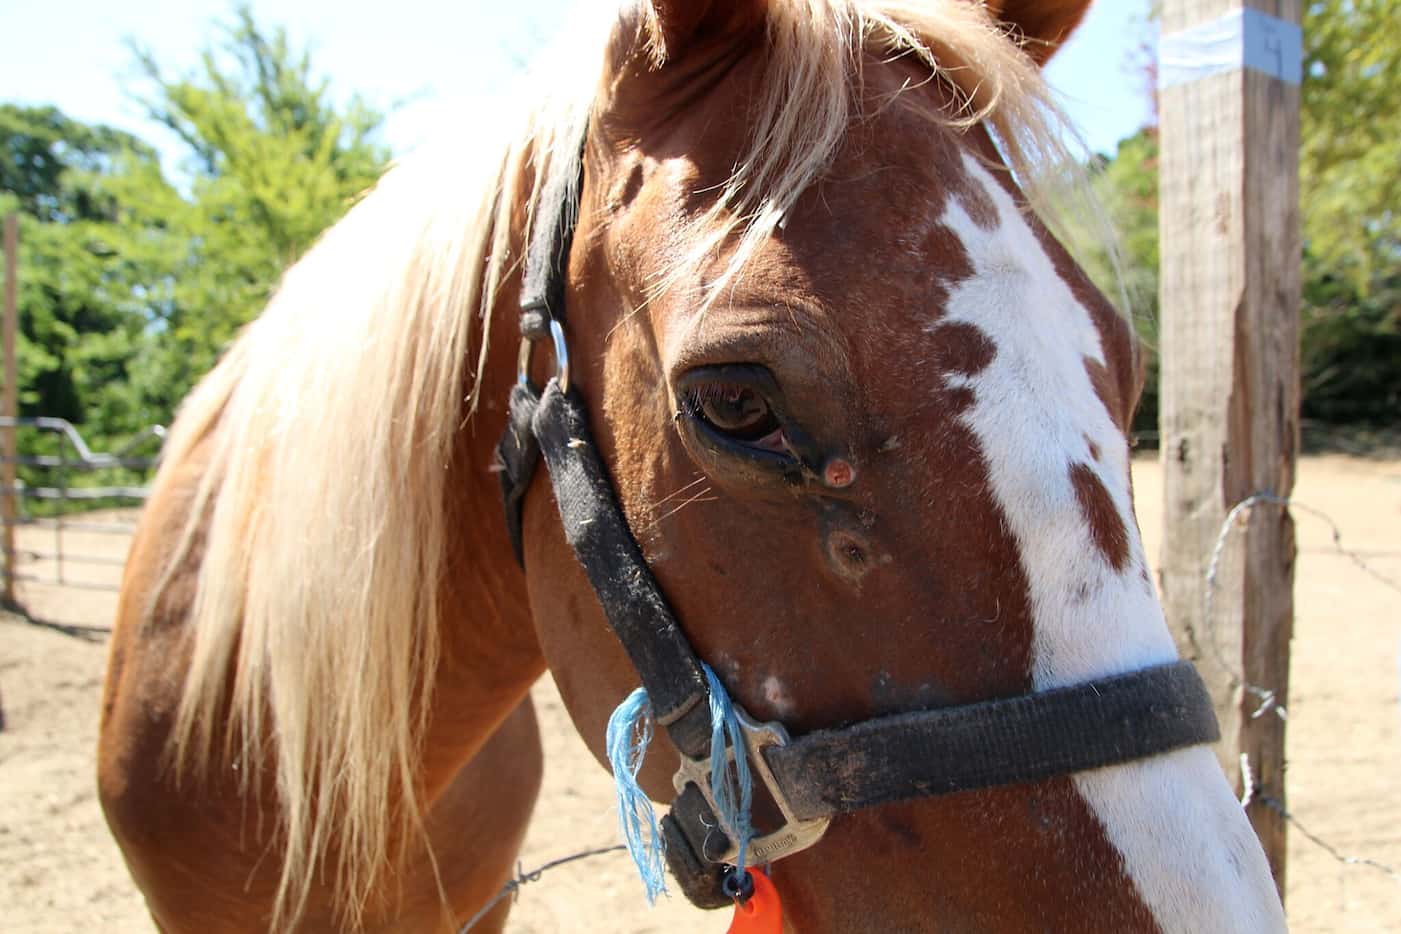 One of the horses seized by the SPCA in Dallas County.